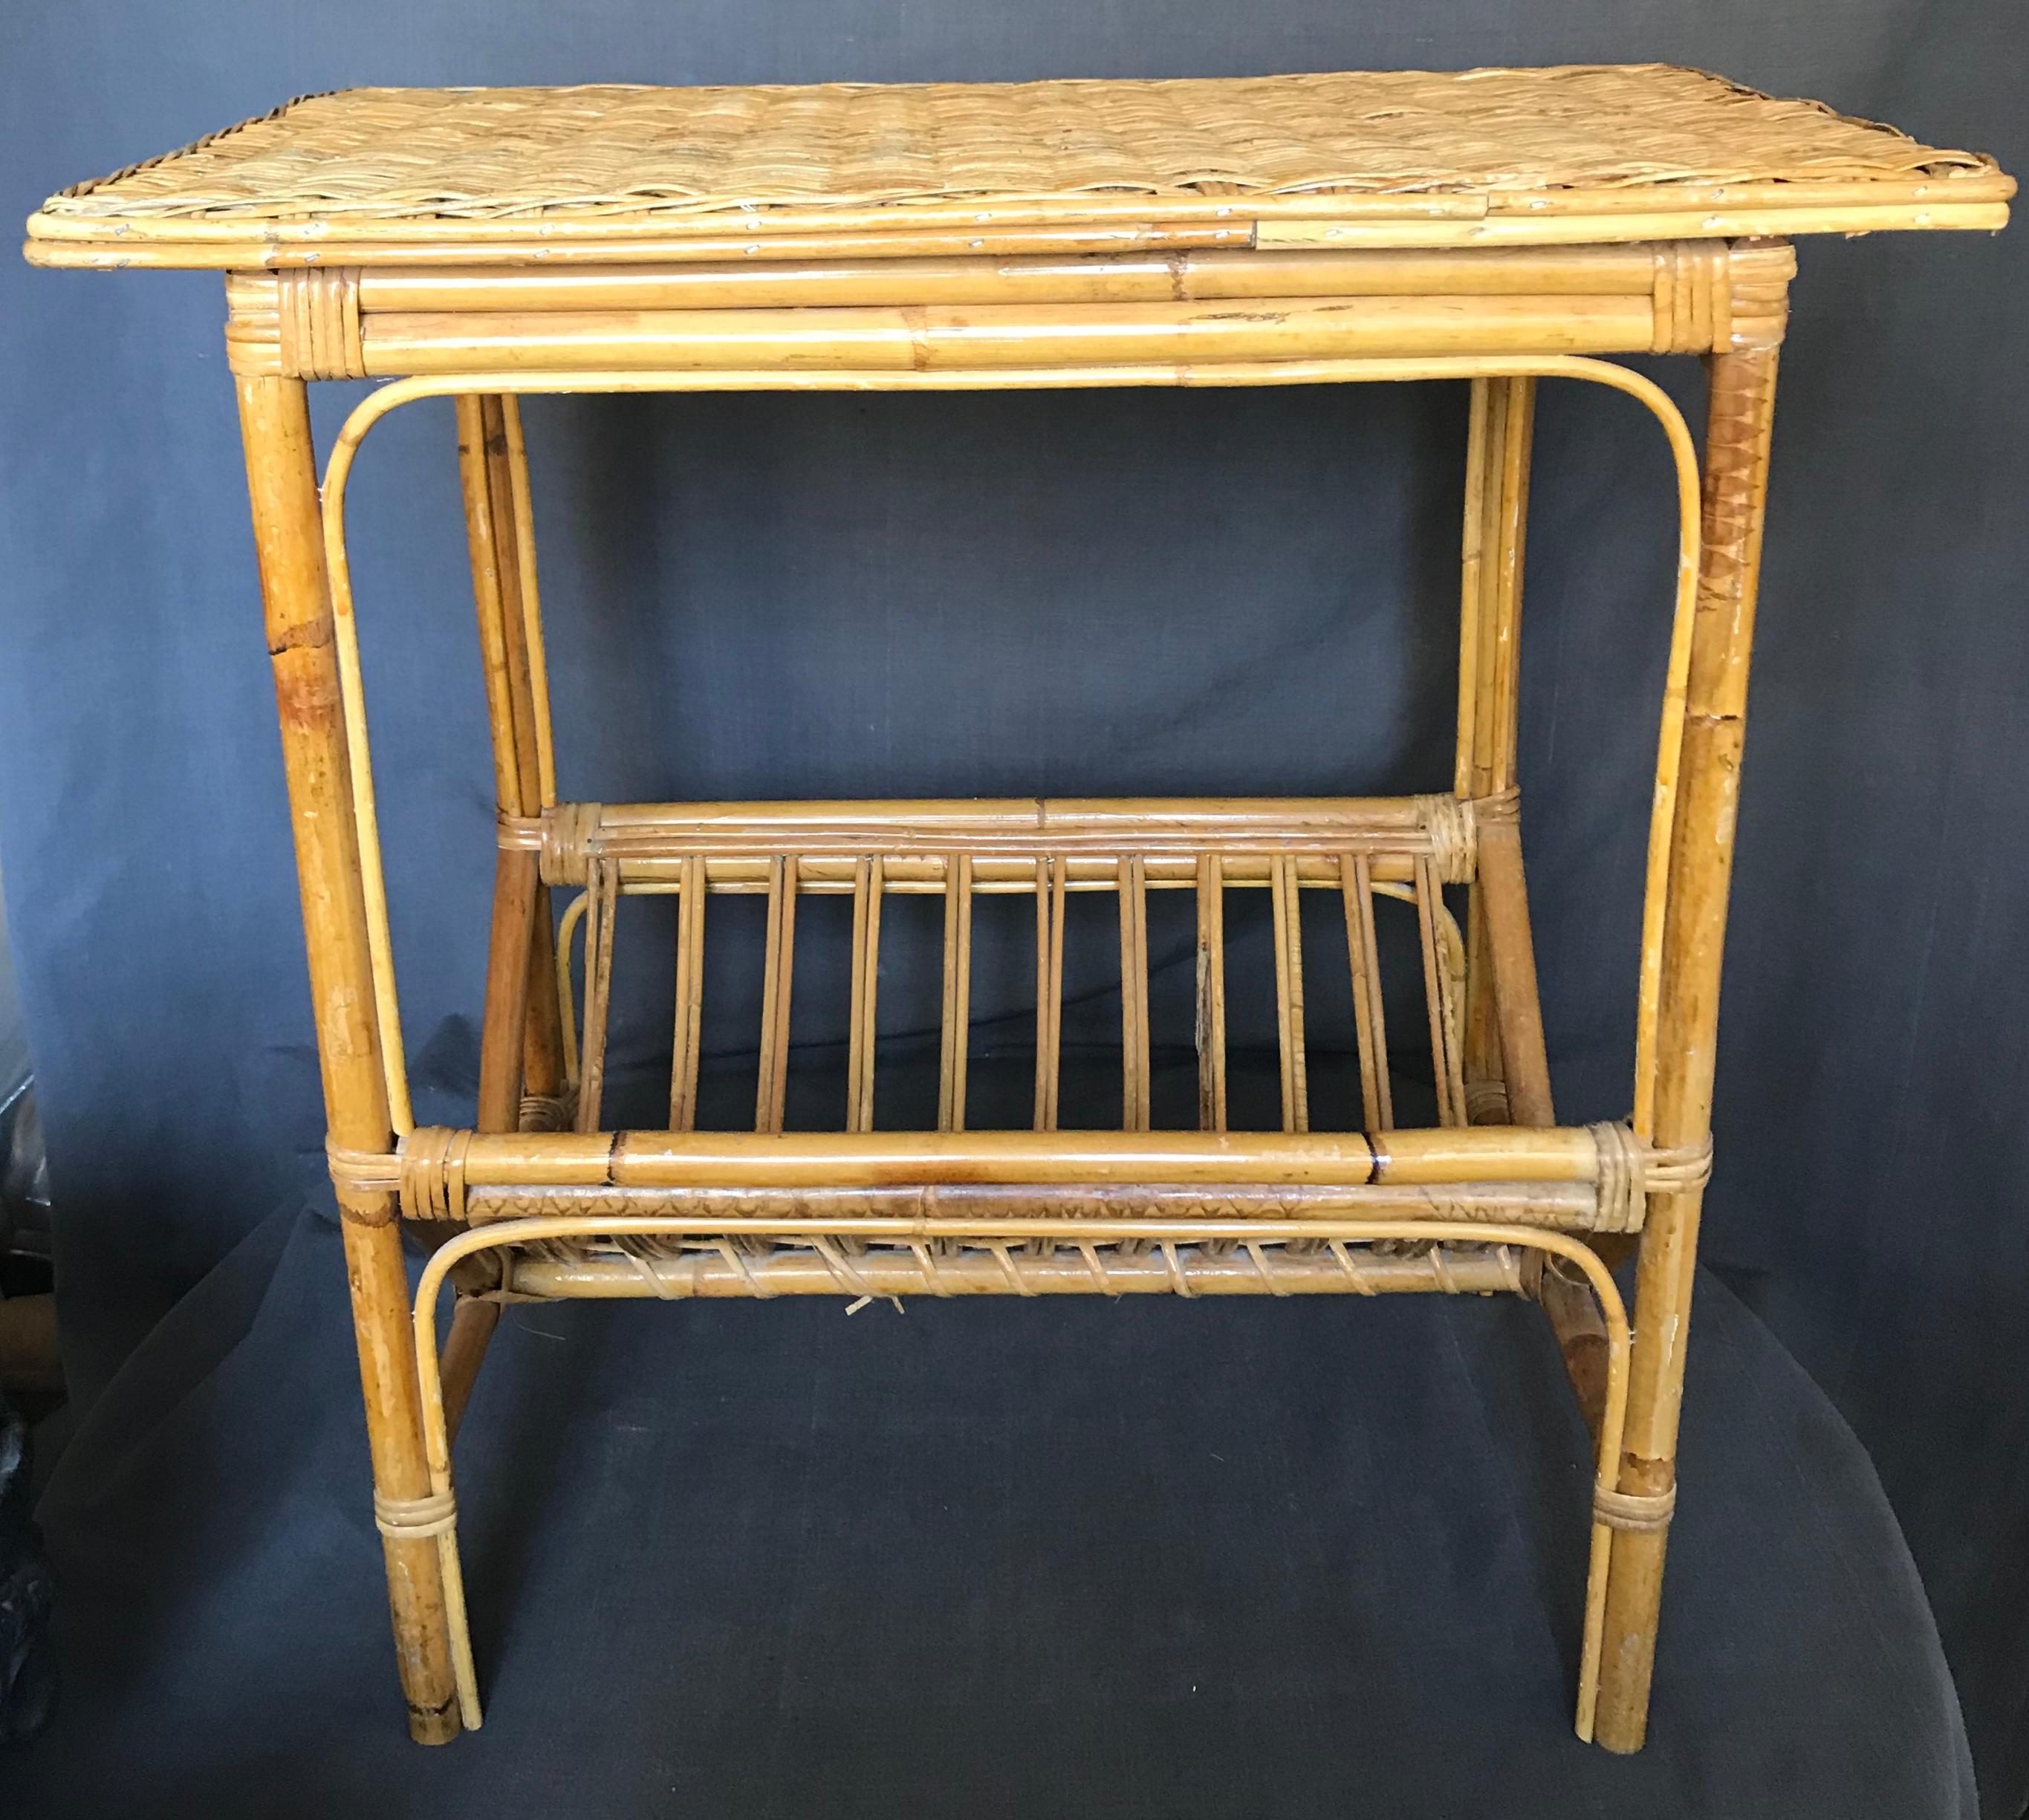 Wicker and bamboo side table. Vintage American softly patinaed wicker table with lower rack for newspapers and magazines or rolls of towel; perfect as a pool house tea table or side table. United States, mid-20th century.
Dimensions: 25